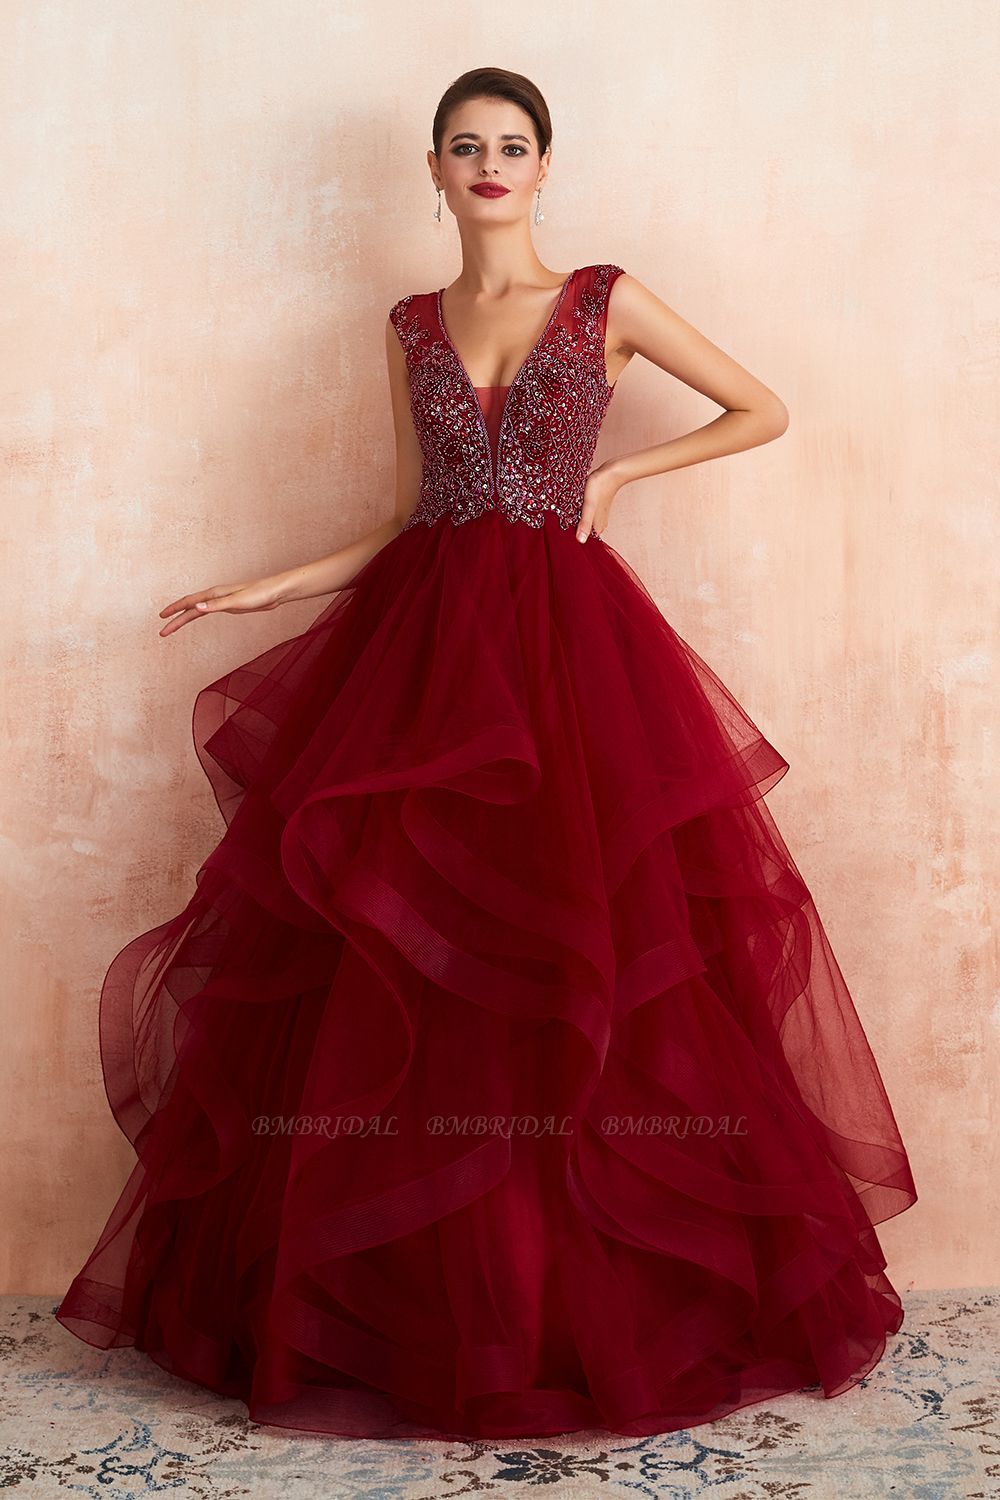 BMbridal Luxurious Bugrundy Tulle Prom Dress Long Ruffles With Appliques Evening Gowns